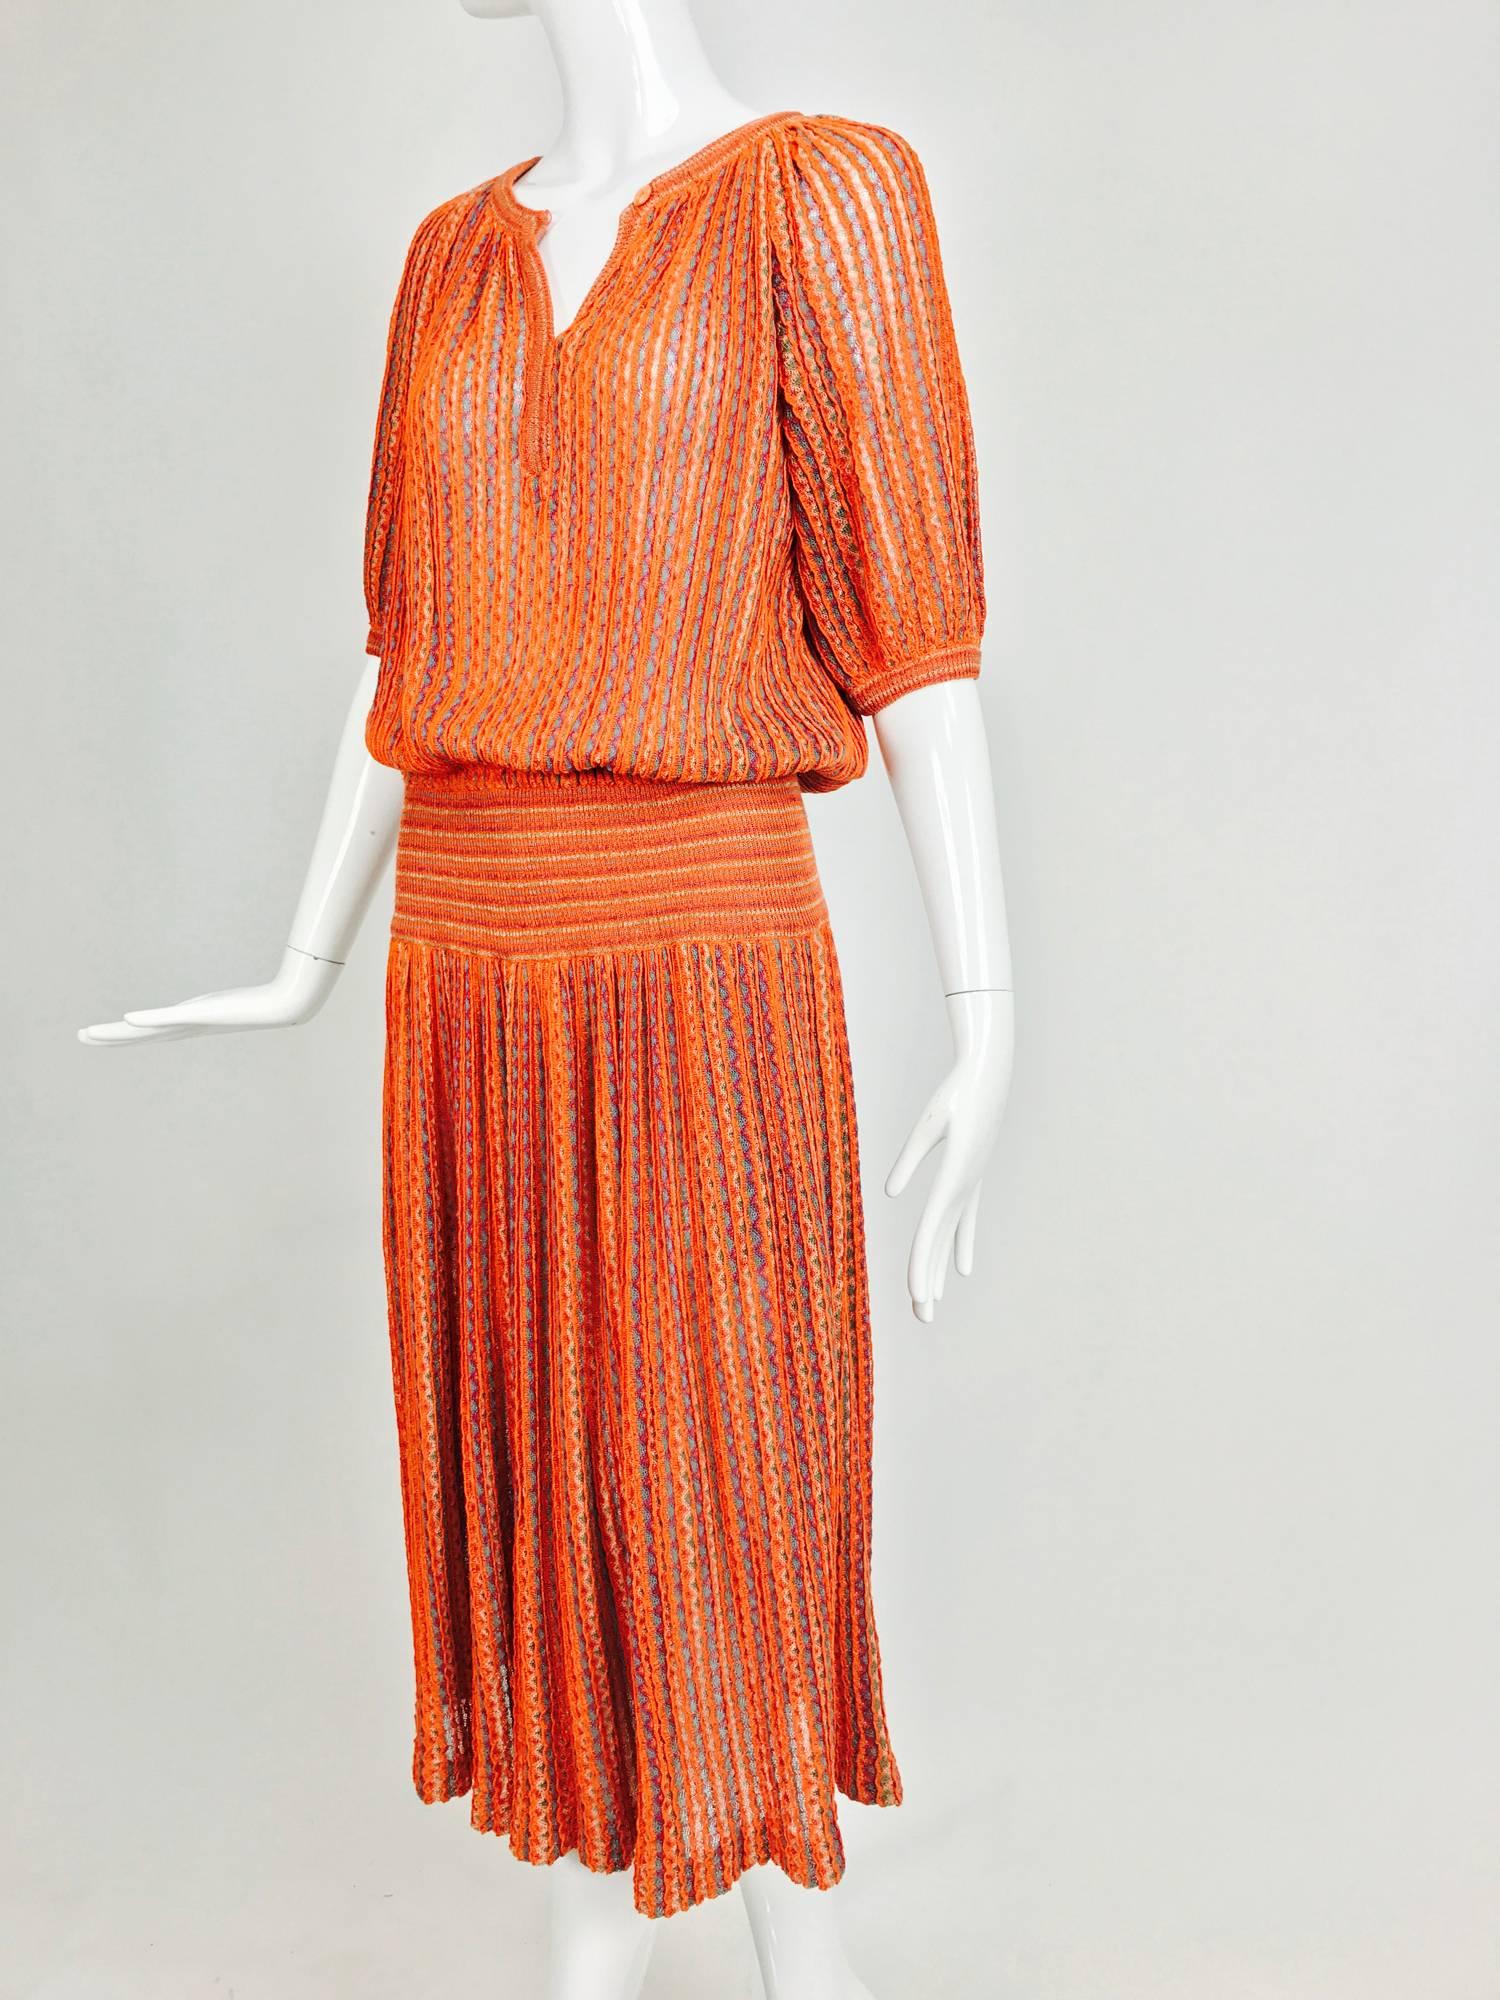 From the 1970s, I love the style of this Missoni dress and the variegated threads of coral, pale pin and green add depth and dimension to the knit, which is woven vertically...Pull on dress has a banded neckline and placket front it closes with a